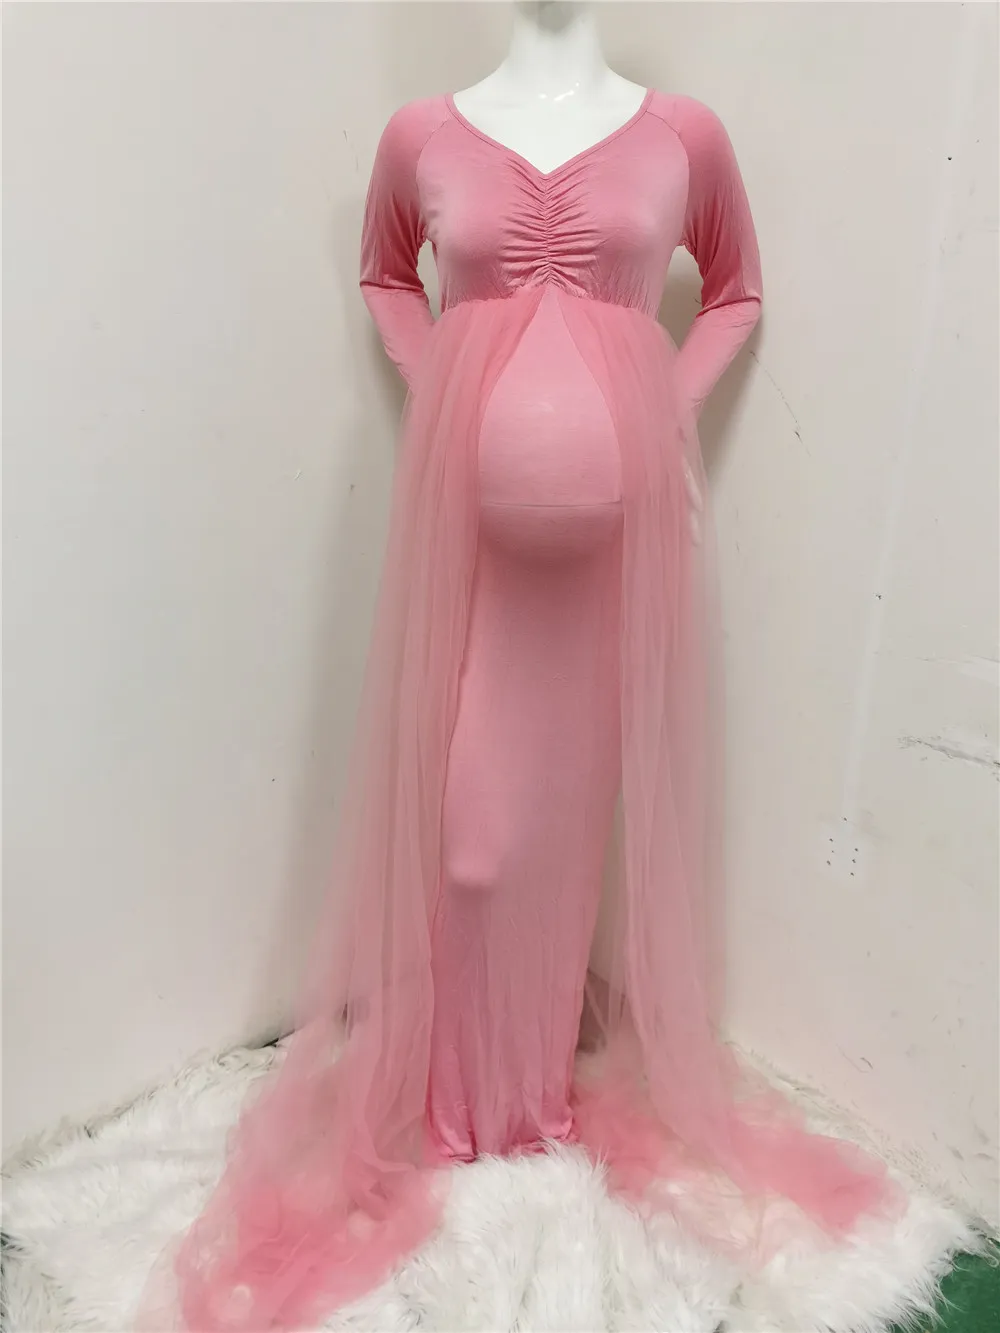 2020 Maternity Dresses Photography Props Shoulderless Pregnancy Long Dress For Pregnant Women Maxi Gown Baby Showers Photo Shoot (1)